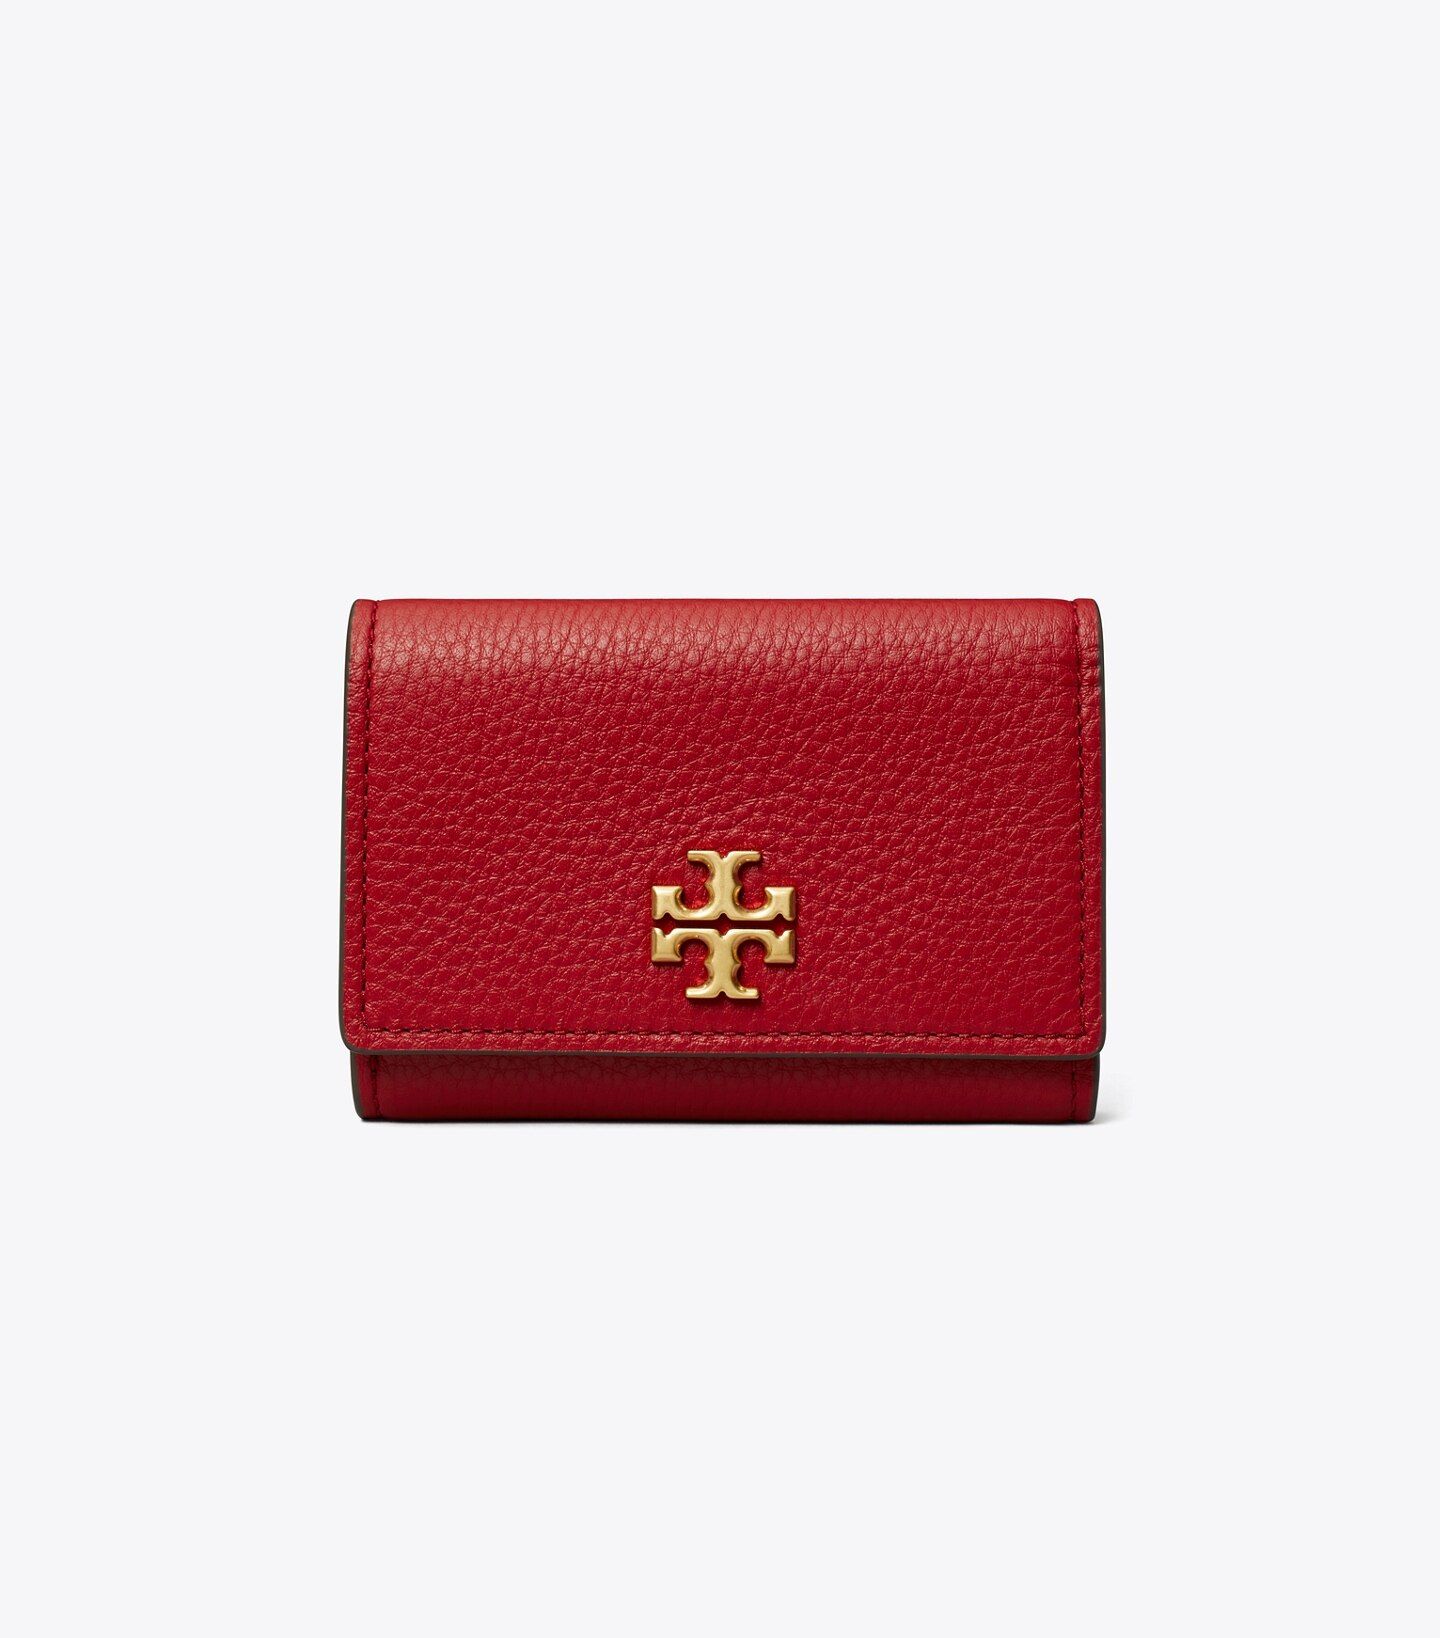 Session is about to end29:59Continue to save your informationContinue | Tory Burch (US)